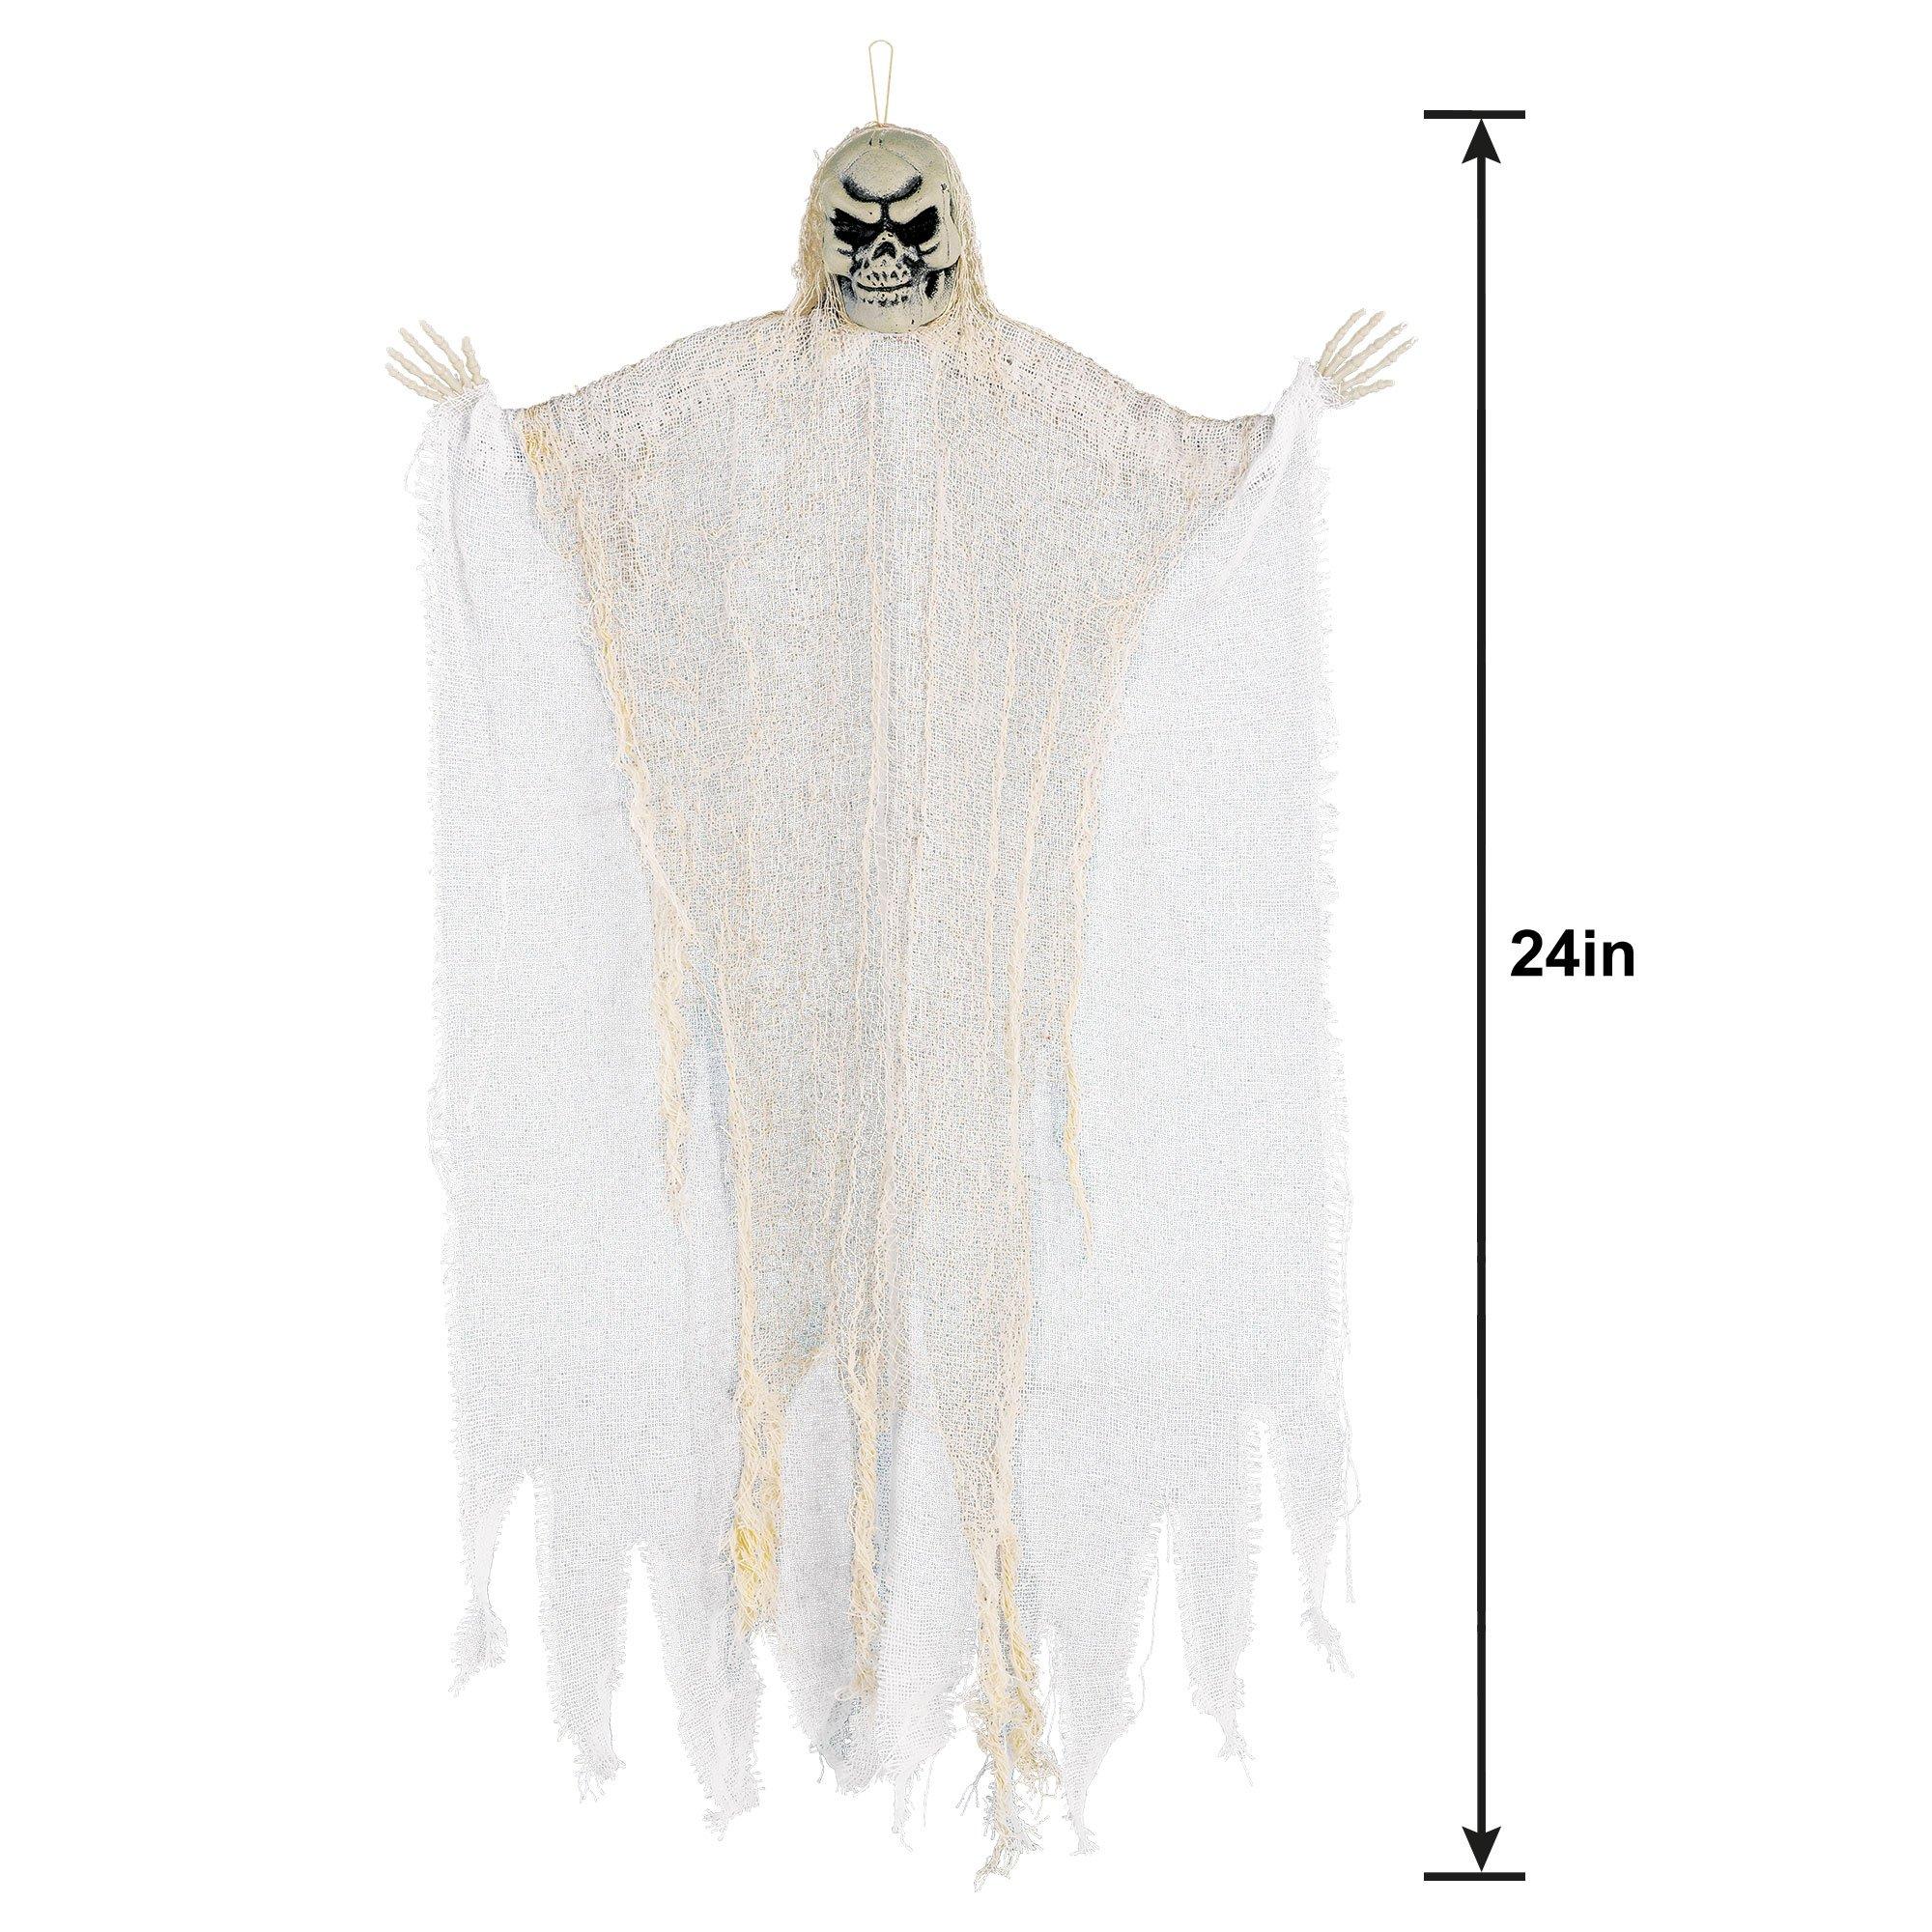 Small Haunting White Reaper Decoration 24in | Party City